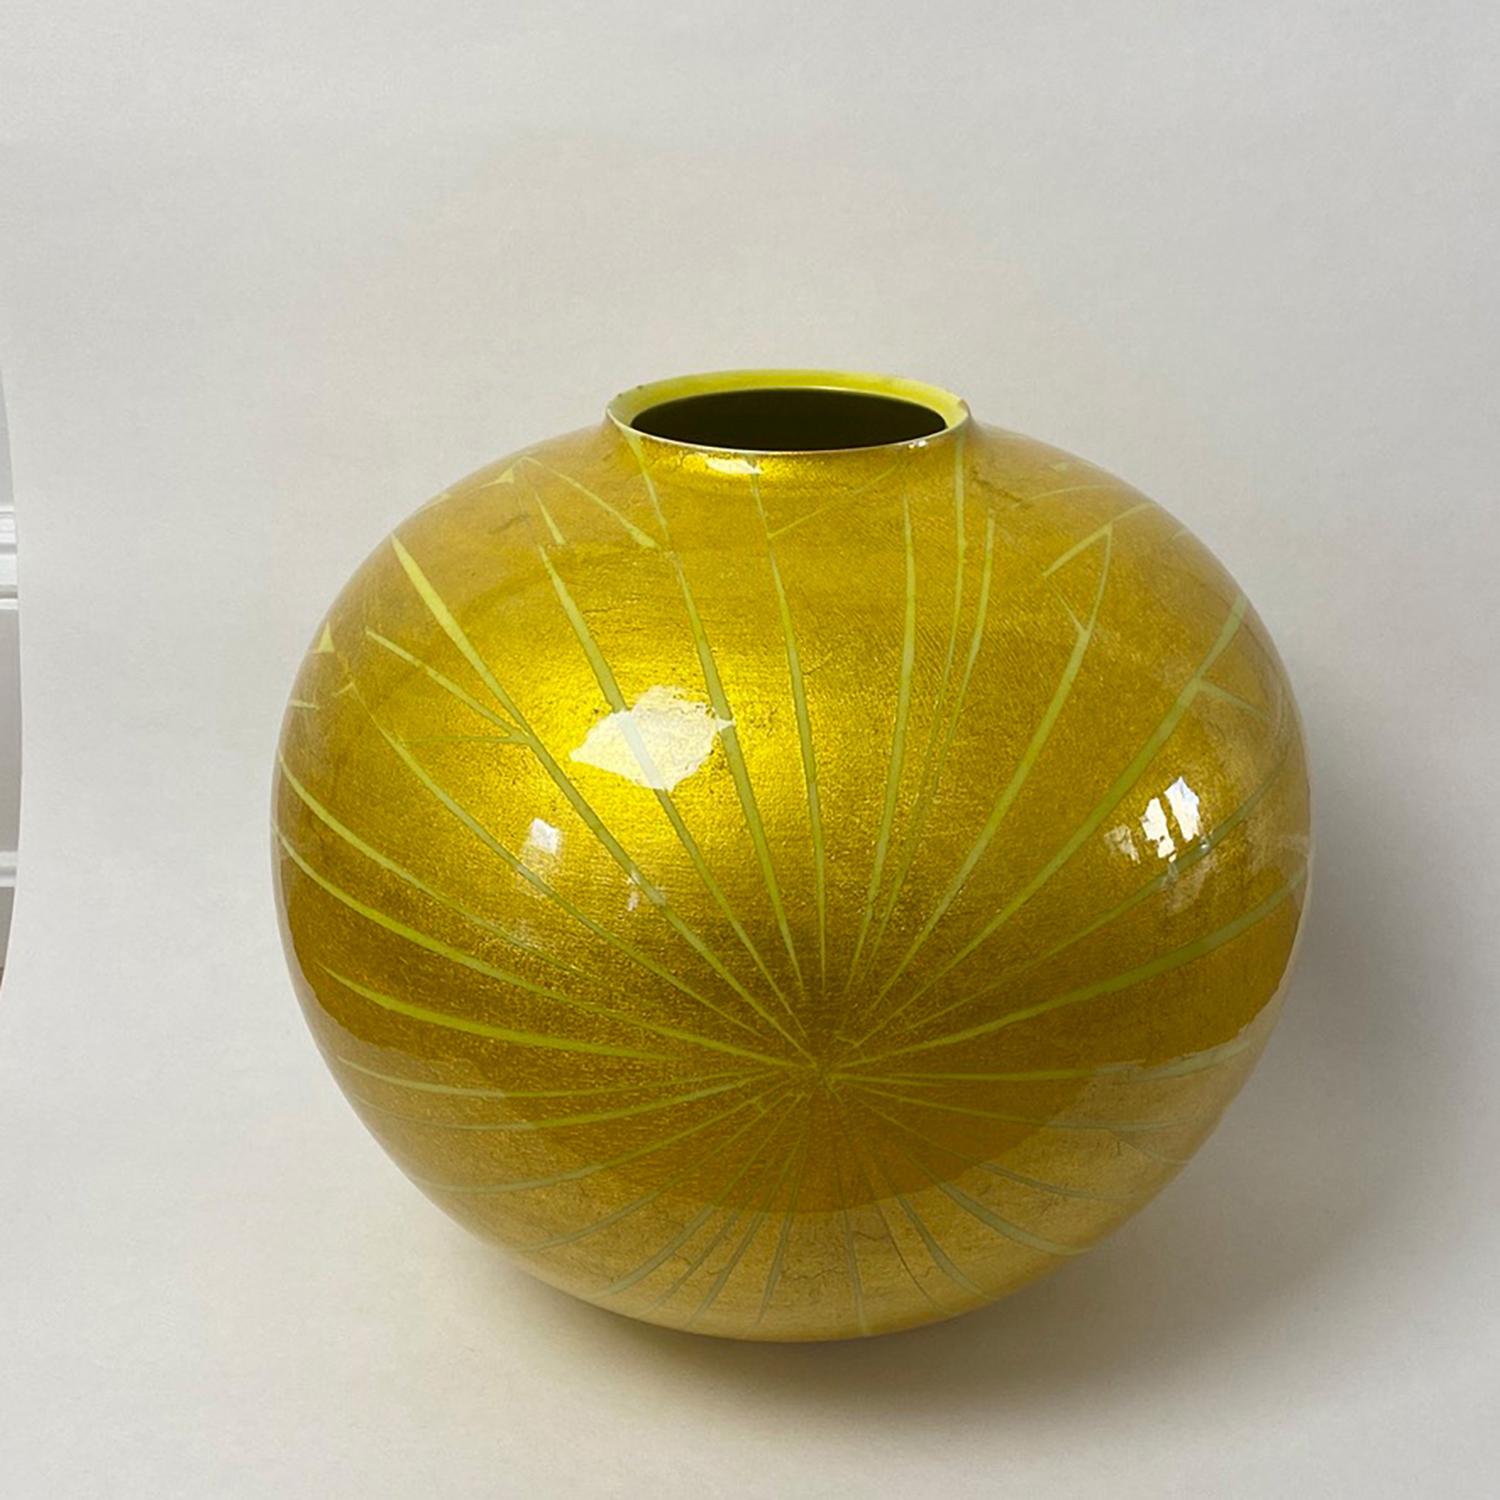 ONO HAKUKO (1915-1996)
Yellow Globular Vessel
Porcelain, gold leaf
11.5 x 11 inches
With artist signed tomobako

From Aichi prefecture, Ono Hakuko (1915-1996) as trained by her father initially in the ceramic arts. However she was most strongly